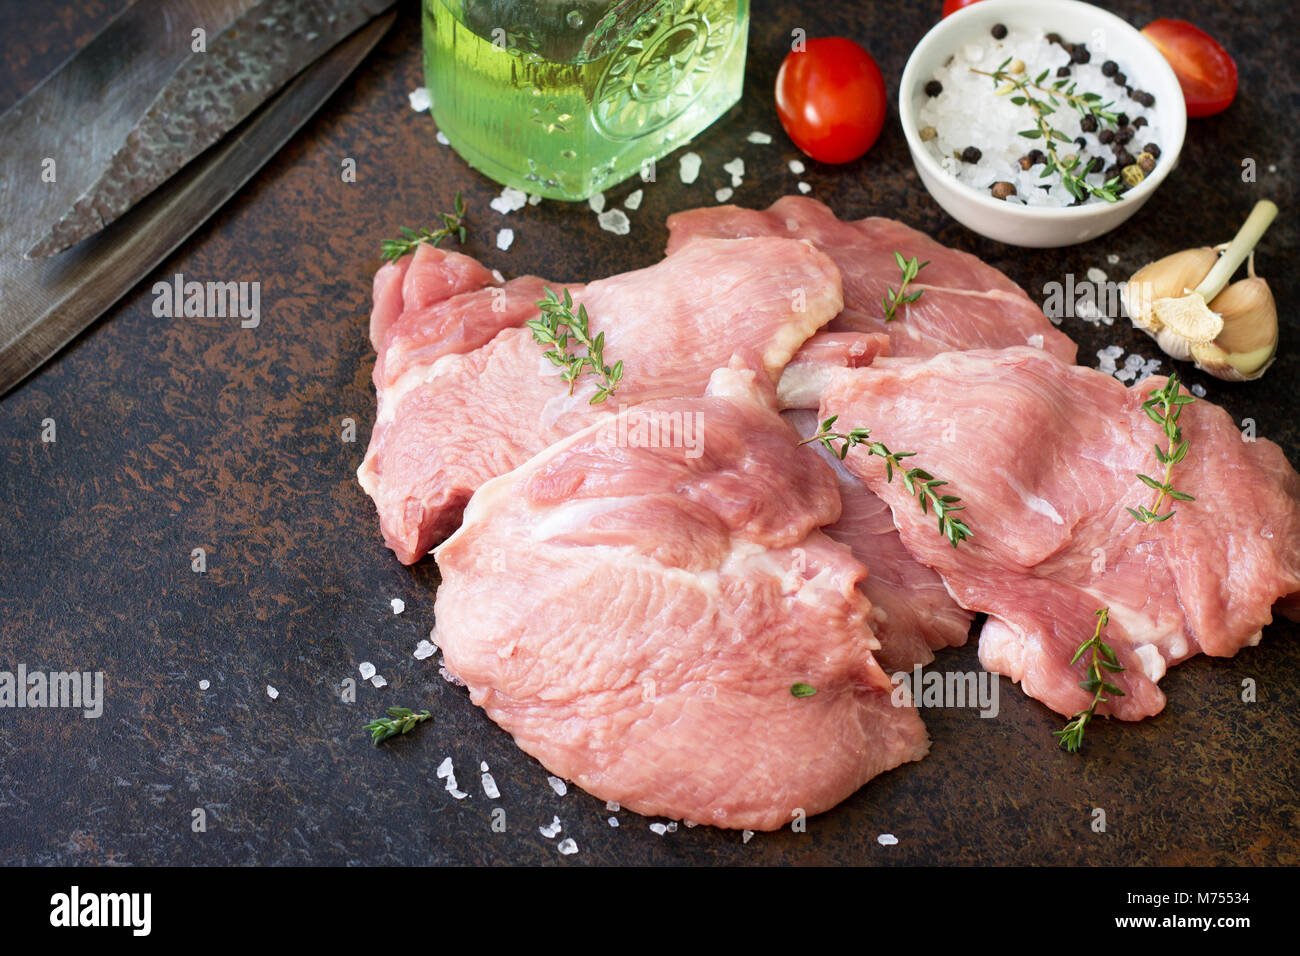 Fresh meat. Raw turkey shin, tomatoes, lemons and spices on a stone table. Stock Photo